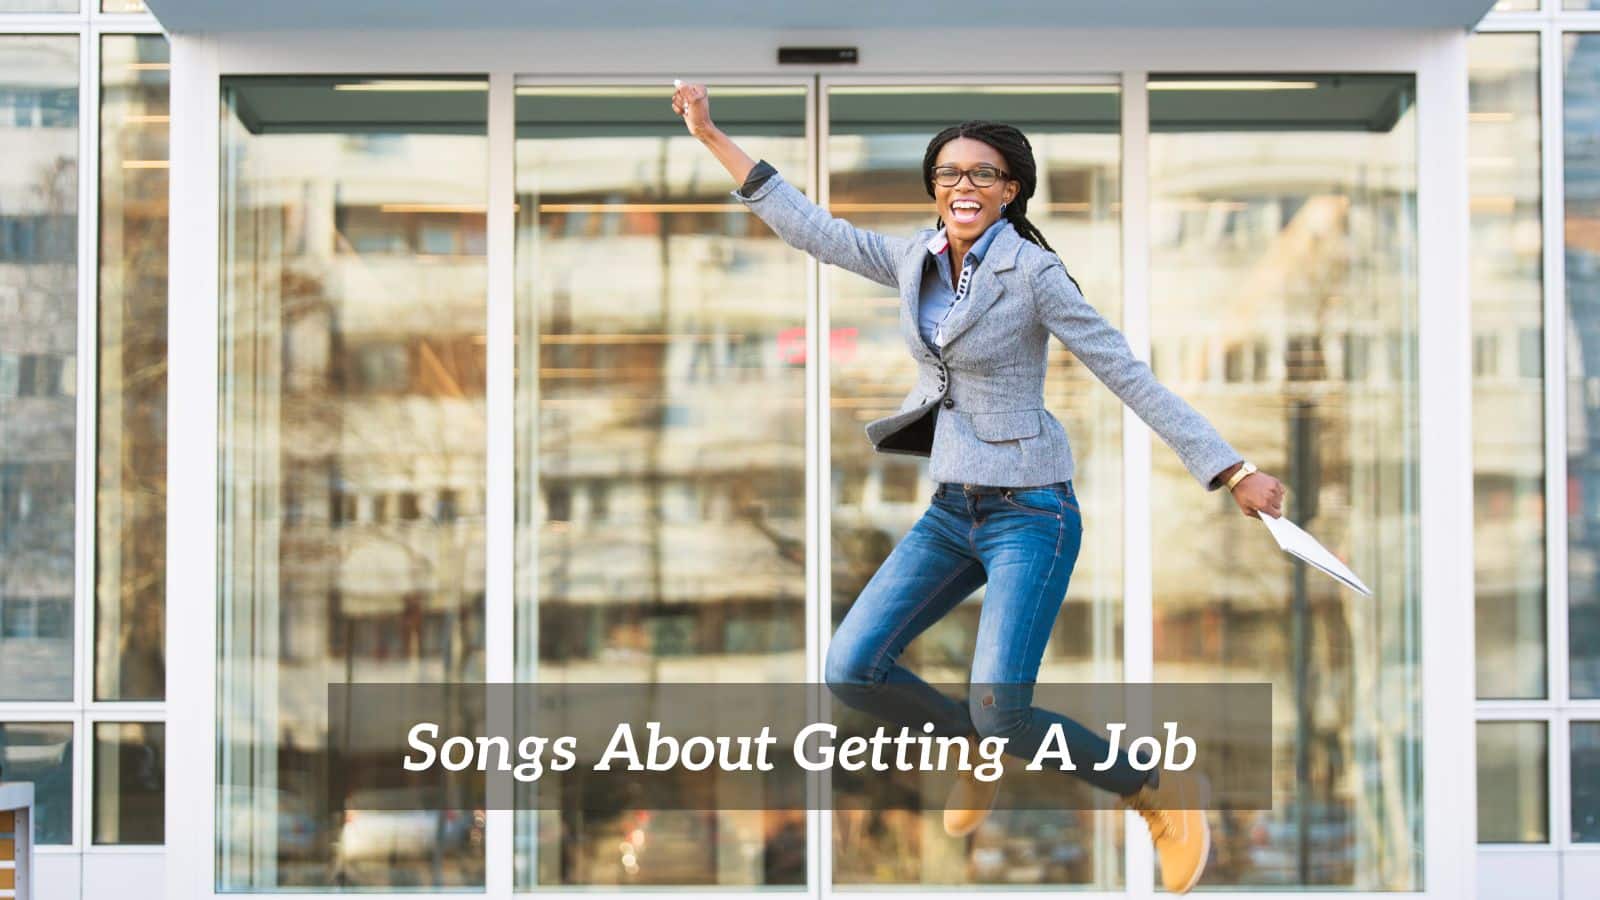 Songs About Getting A Job